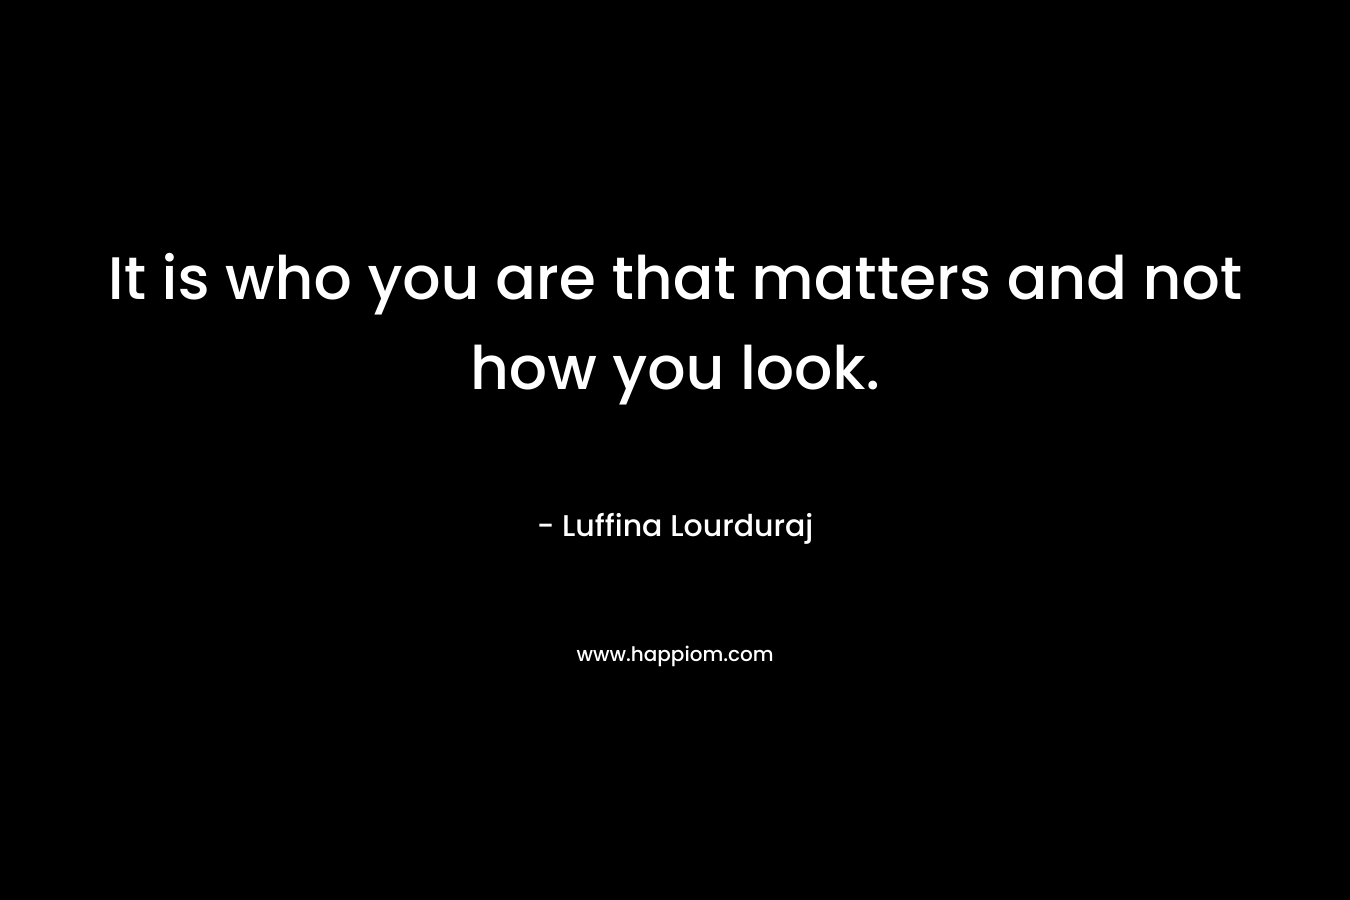 It is who you are that matters and not how you look. – Luffina Lourduraj